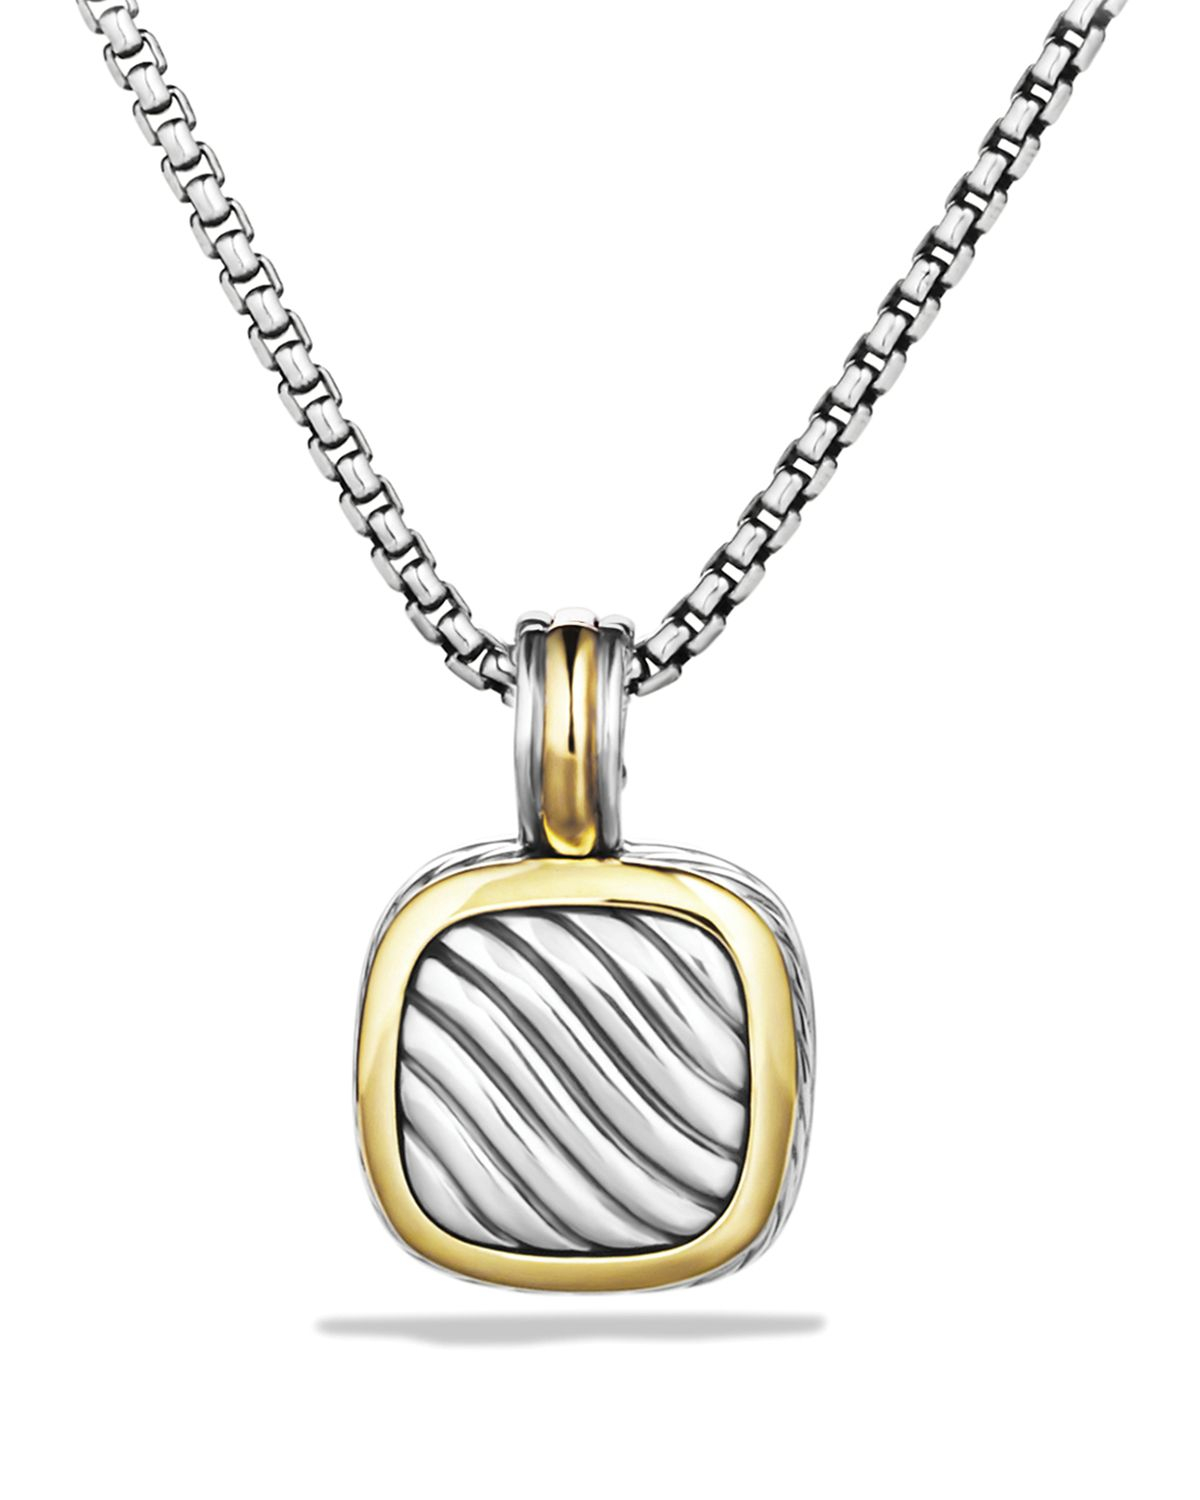 Lyst - David yurman Sculpted Cable Small Square Pendant With Gold in Metallic